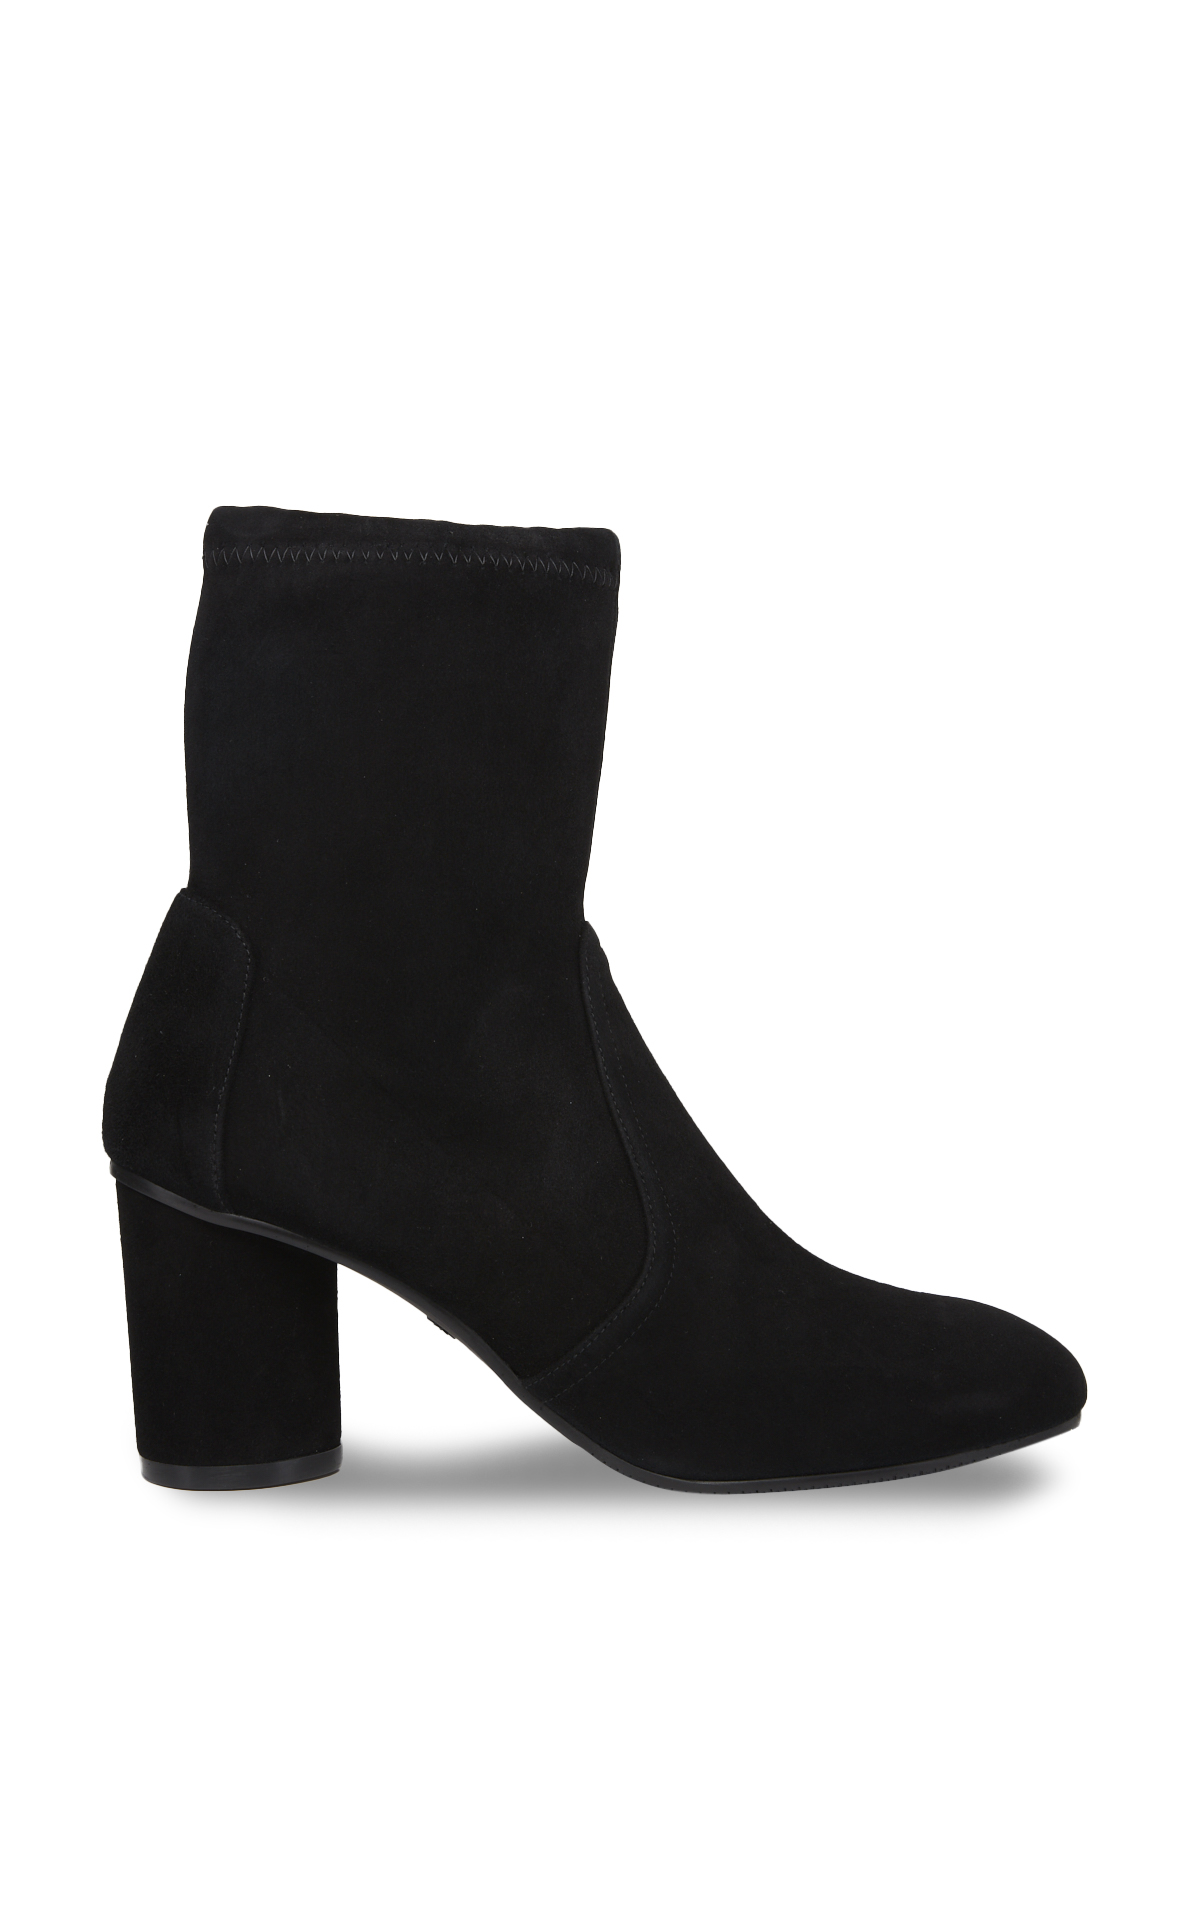 Black nubuck ankle boots with rounded heels*